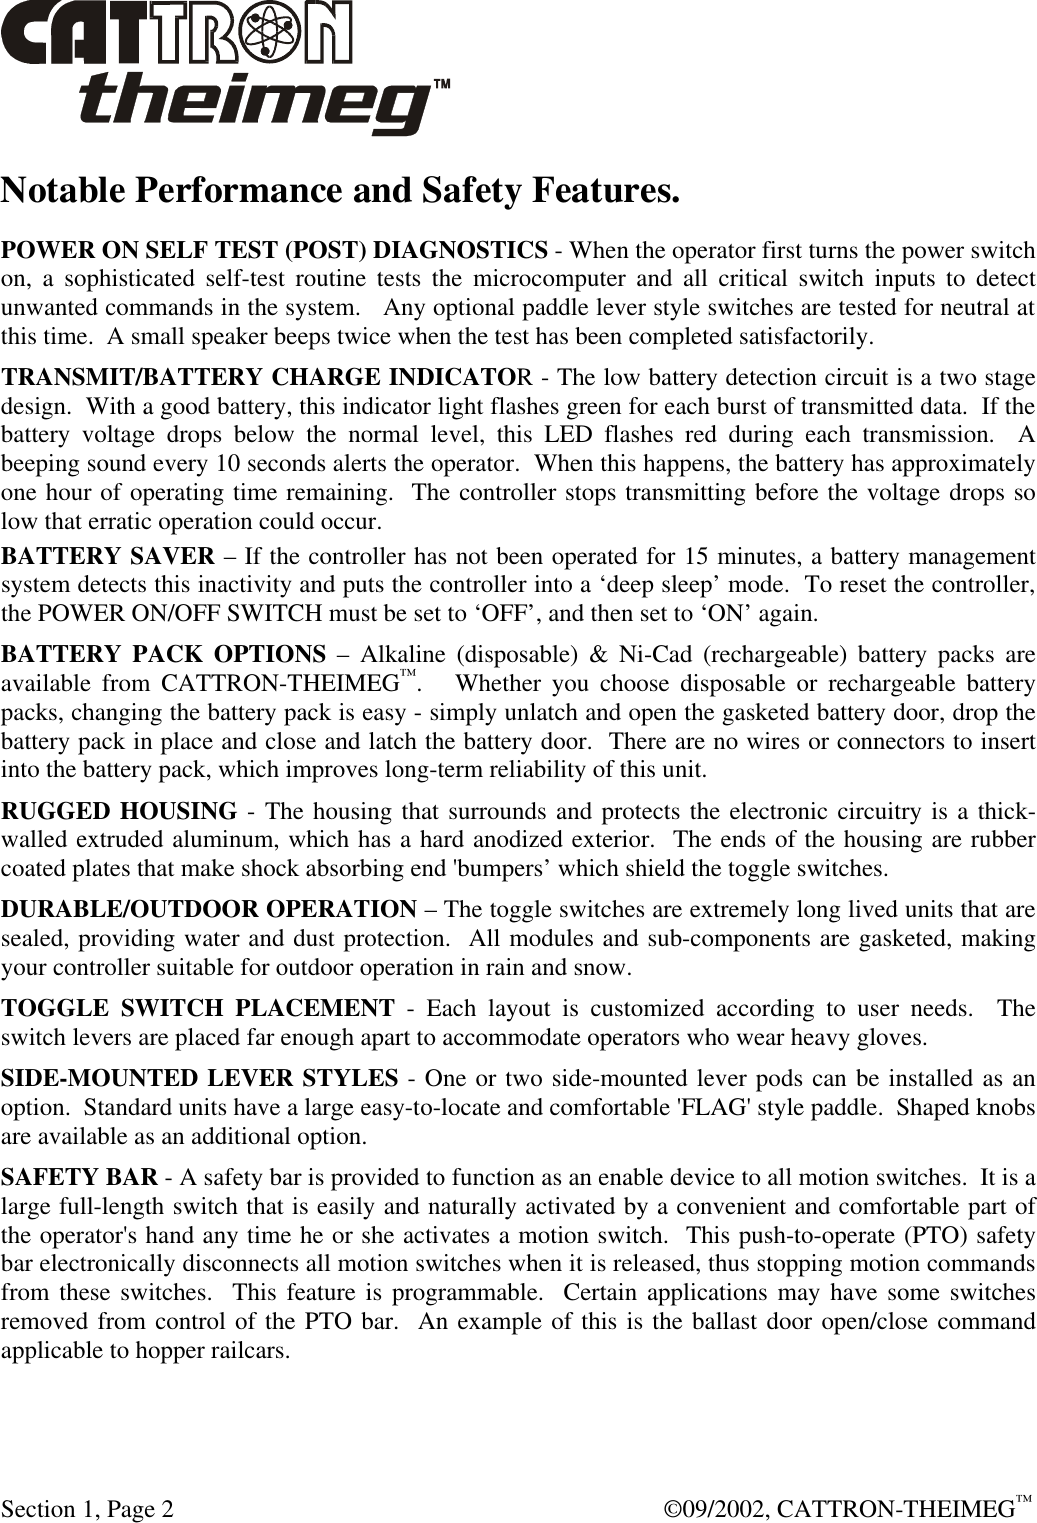  Section 1, Page 2  ©09/2002, CATTRON-THEIMEG™ Notable Performance and Safety Features. POWER ON SELF TEST (POST) DIAGNOSTICS - When the operator first turns the power switch on, a sophisticated self-test routine tests the microcomputer and all critical switch inputs to detect unwanted commands in the system.   Any optional paddle lever style switches are tested for neutral at this time.  A small speaker beeps twice when the test has been completed satisfactorily. TRANSMIT/BATTERY CHARGE INDICATOR - The low battery detection circuit is a two stage design.  With a good battery, this indicator light flashes green for each burst of transmitted data.  If the battery voltage drops below the normal level, this LED flashes red during each transmission.  A beeping sound every 10 seconds alerts the operator.  When this happens, the battery has approximately one hour of operating time remaining.  The controller stops transmitting before the voltage drops so low that erratic operation could occur.   BATTERY SAVER – If the controller has not been operated for 15 minutes, a battery management system detects this inactivity and puts the controller into a ‘deep sleep’ mode.  To reset the controller, the POWER ON/OFF SWITCH must be set to ‘OFF’, and then set to ‘ON’ again. BATTERY PACK OPTIONS – Alkaline (disposable) &amp; Ni-Cad (rechargeable) battery packs are available from CATTRON-THEIMEG™.   Whether you choose disposable or rechargeable battery packs, changing the battery pack is easy - simply unlatch and open the gasketed battery door, drop the battery pack in place and close and latch the battery door.  There are no wires or connectors to insert into the battery pack, which improves long-term reliability of this unit. RUGGED HOUSING - The housing that surrounds and protects the electronic circuitry is a thick-walled extruded aluminum, which has a hard anodized exterior.  The ends of the housing are rubber coated plates that make shock absorbing end &apos;bumpers’ which shield the toggle switches. DURABLE/OUTDOOR OPERATION – The toggle switches are extremely long lived units that are sealed, providing water and dust protection.  All modules and sub-components are gasketed, making your controller suitable for outdoor operation in rain and snow. TOGGLE SWITCH PLACEMENT - Each layout is customized according to user needs.  The switch levers are placed far enough apart to accommodate operators who wear heavy gloves. SIDE-MOUNTED LEVER STYLES - One or two side-mounted lever pods can be installed as an option.  Standard units have a large easy-to-locate and comfortable &apos;FLAG&apos; style paddle.  Shaped knobs are available as an additional option. SAFETY BAR - A safety bar is provided to function as an enable device to all motion switches.  It is a large full-length switch that is easily and naturally activated by a convenient and comfortable part of the operator&apos;s hand any time he or she activates a motion switch.  This push-to-operate (PTO) safety bar electronically disconnects all motion switches when it is released, thus stopping motion commands from these switches.  This feature is programmable.  Certain applications may have some switches removed from control of the PTO bar.  An example of this is the ballast door open/close command applicable to hopper railcars.   